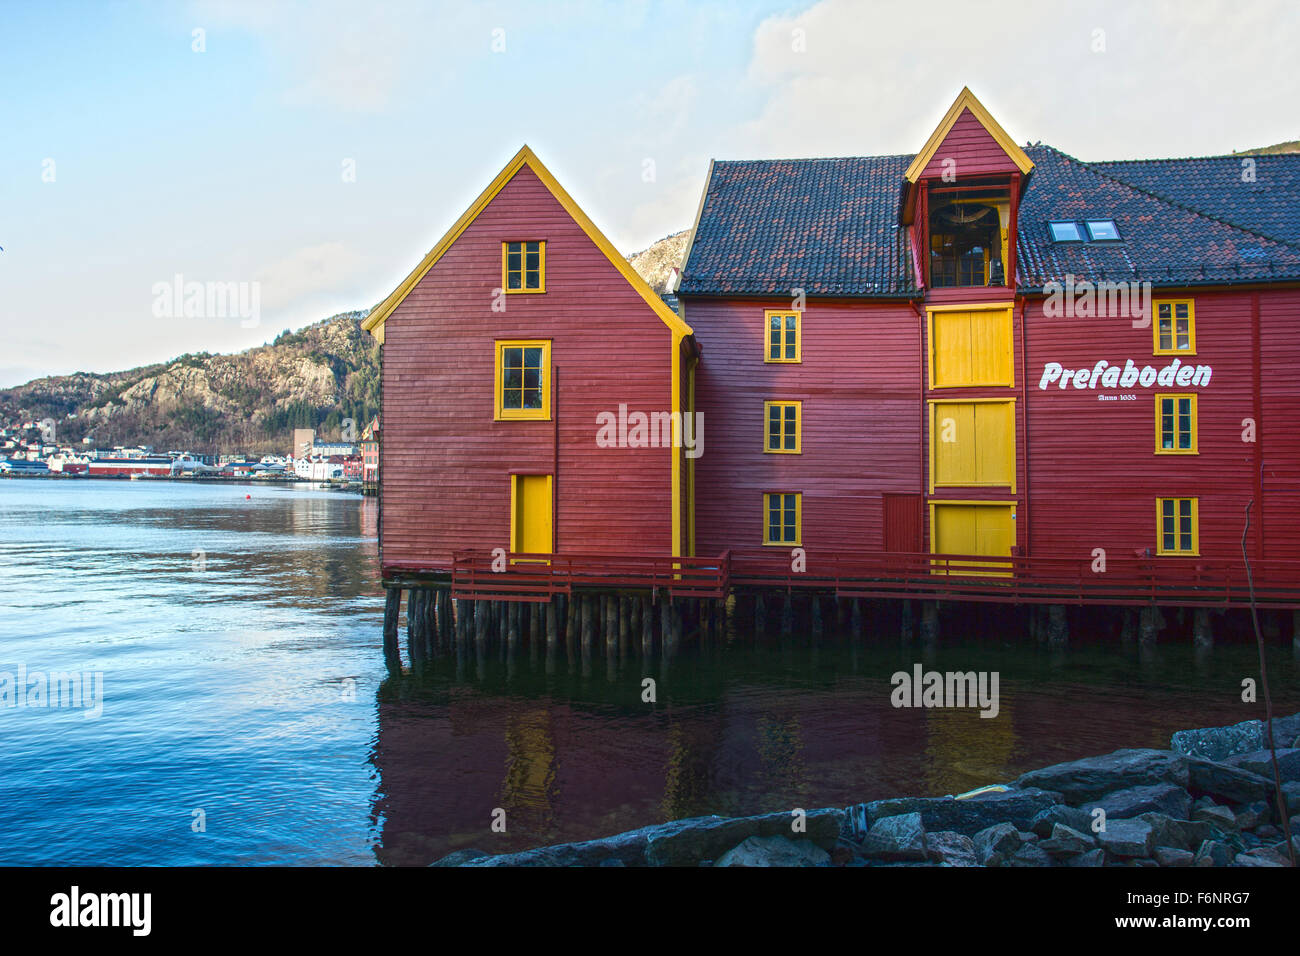 Red and yellow wooden building on stilts in bergen norway Stock Photo